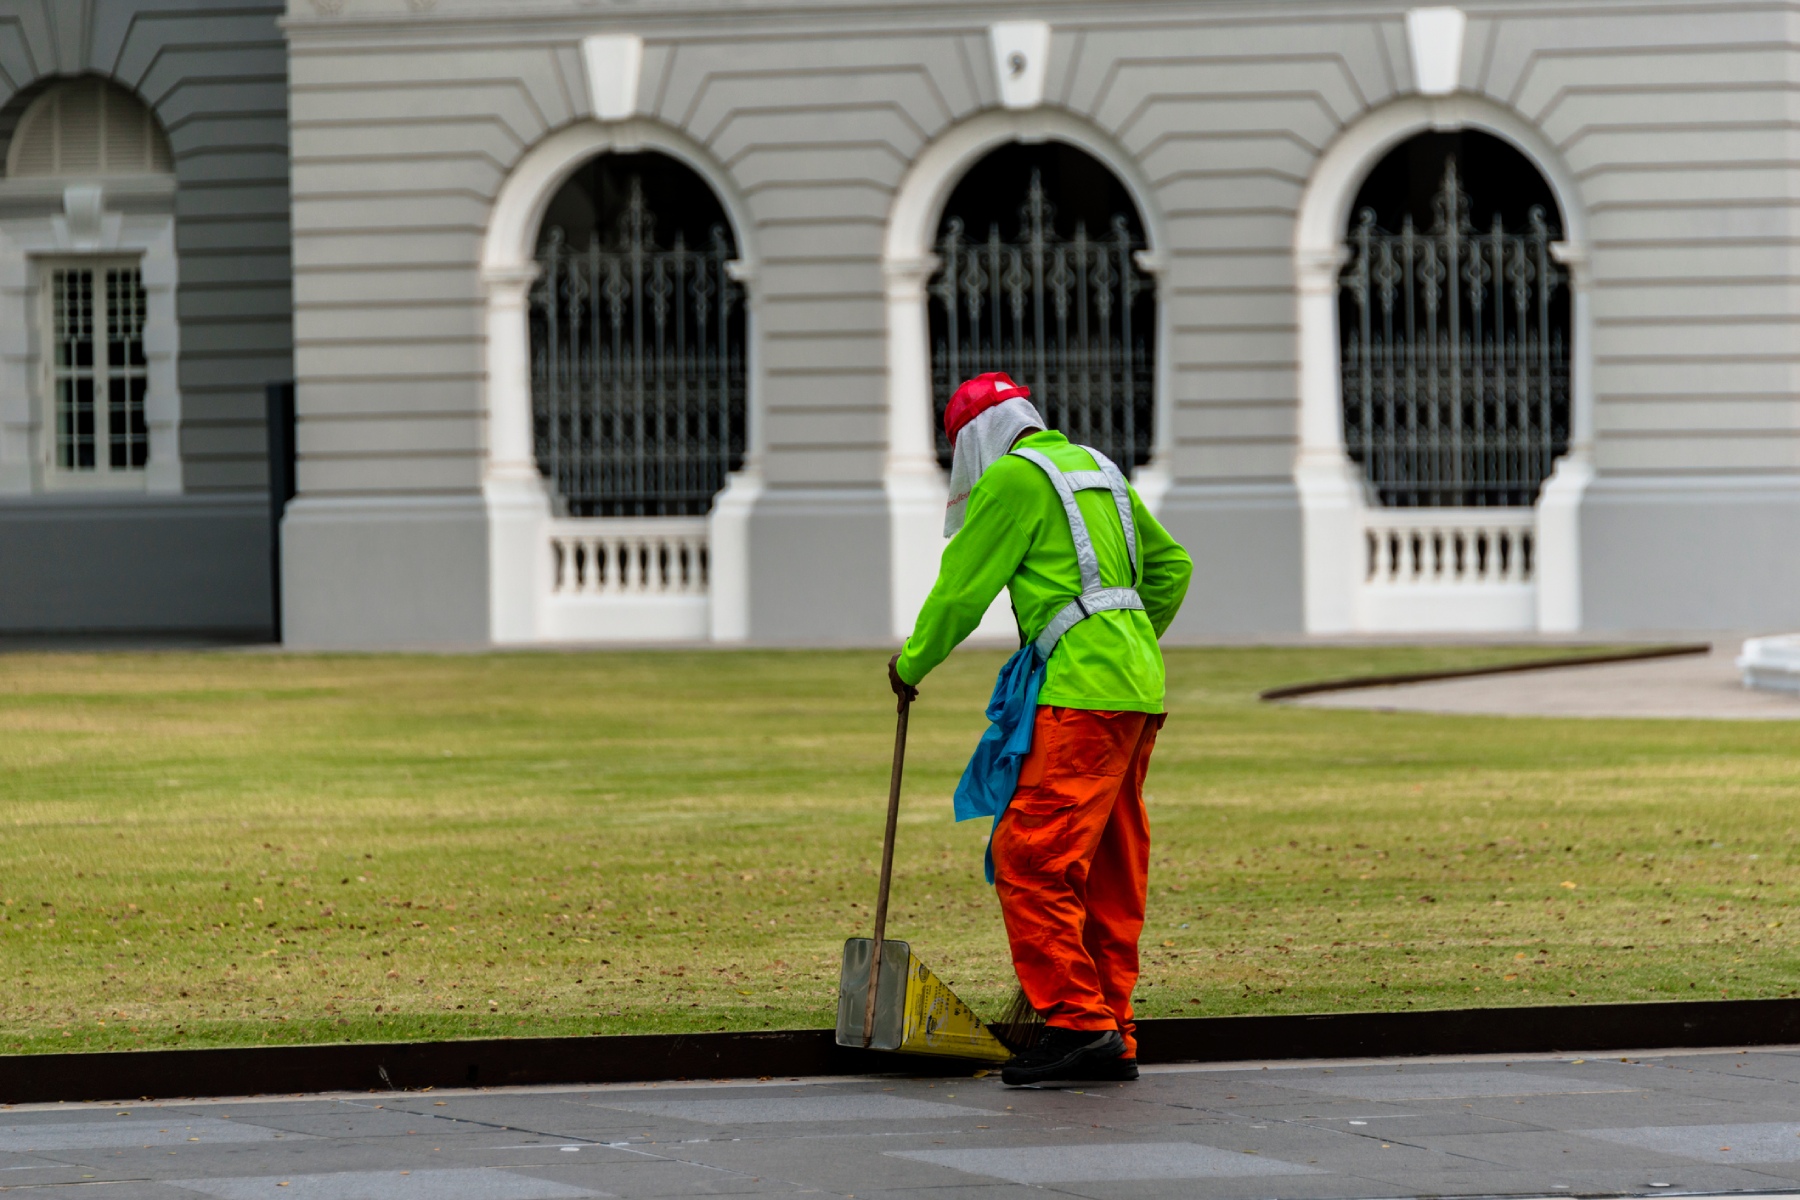 A street sweeper wearing a uniform and cleaning the pavement in front of a building in Singapore